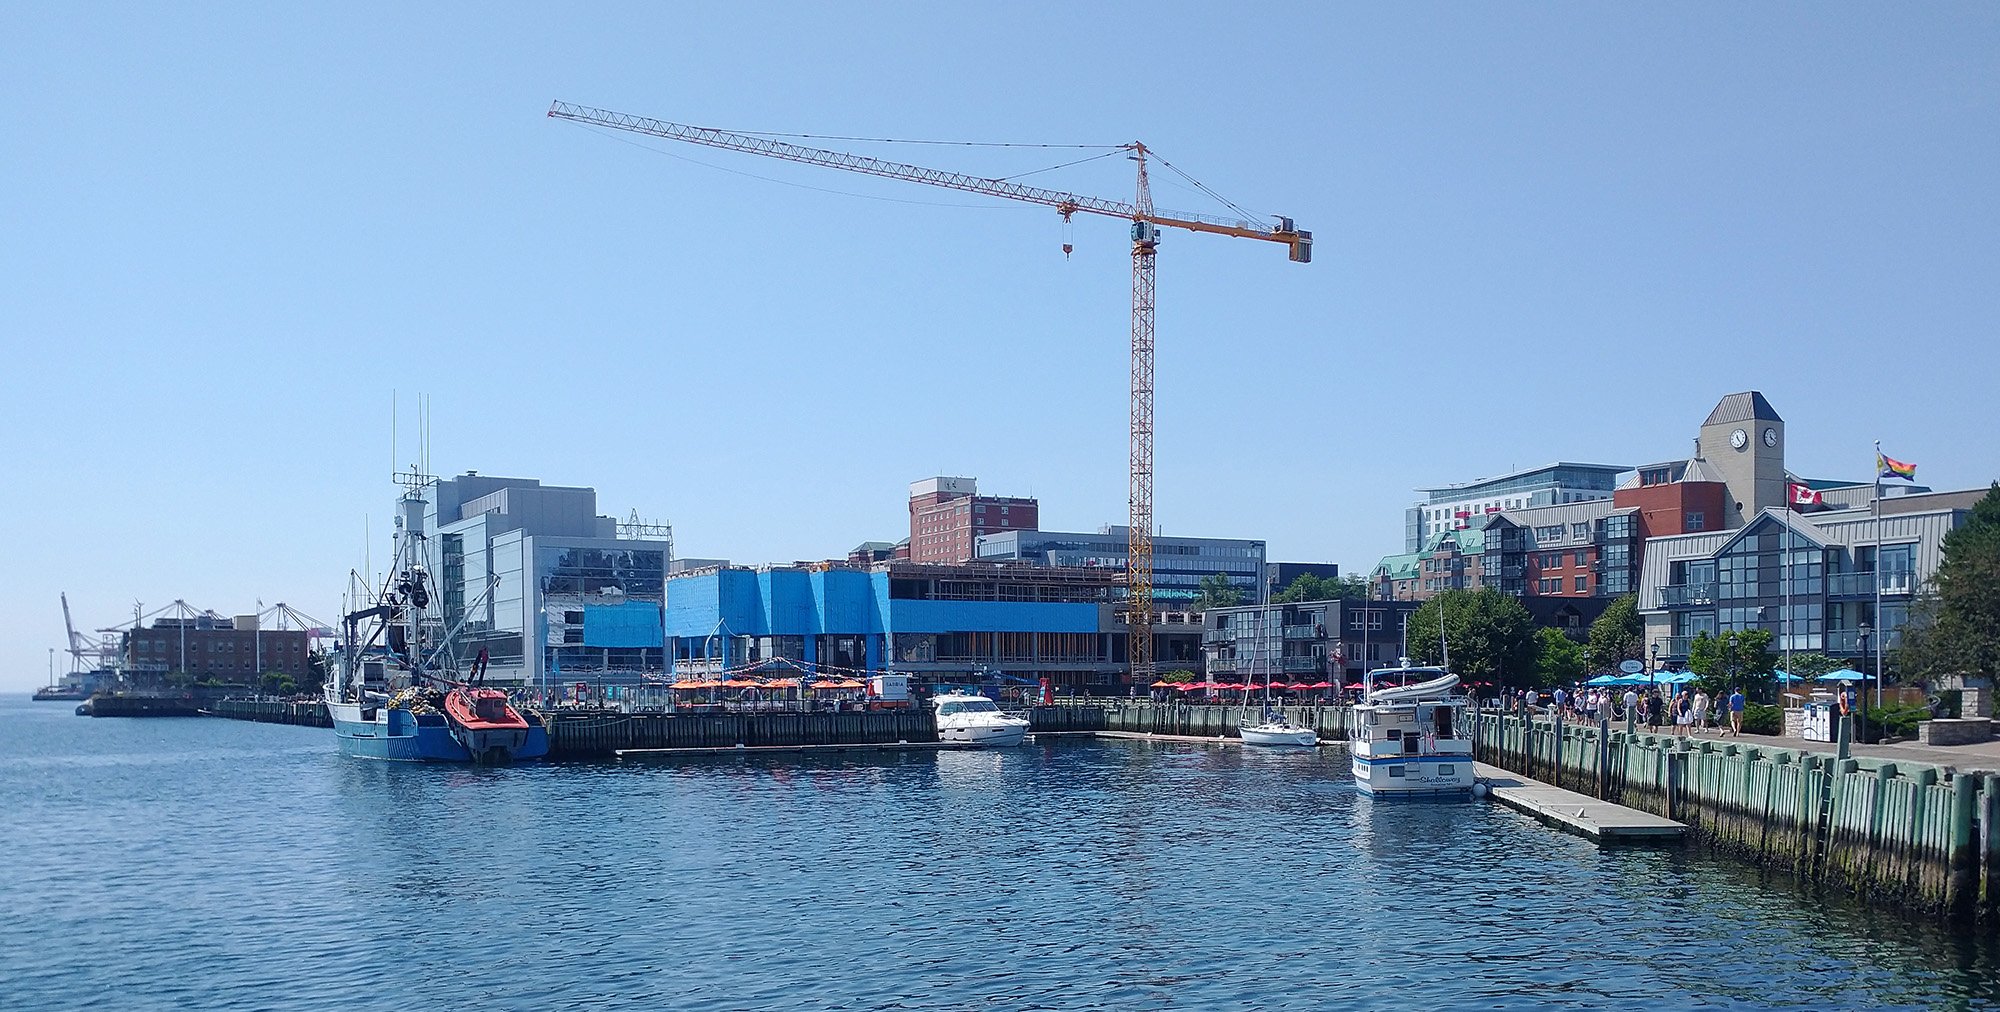 Saw lots of construction going on. Halifax is one of the hottest real estate markets in the country right now as other places become unlivable. 